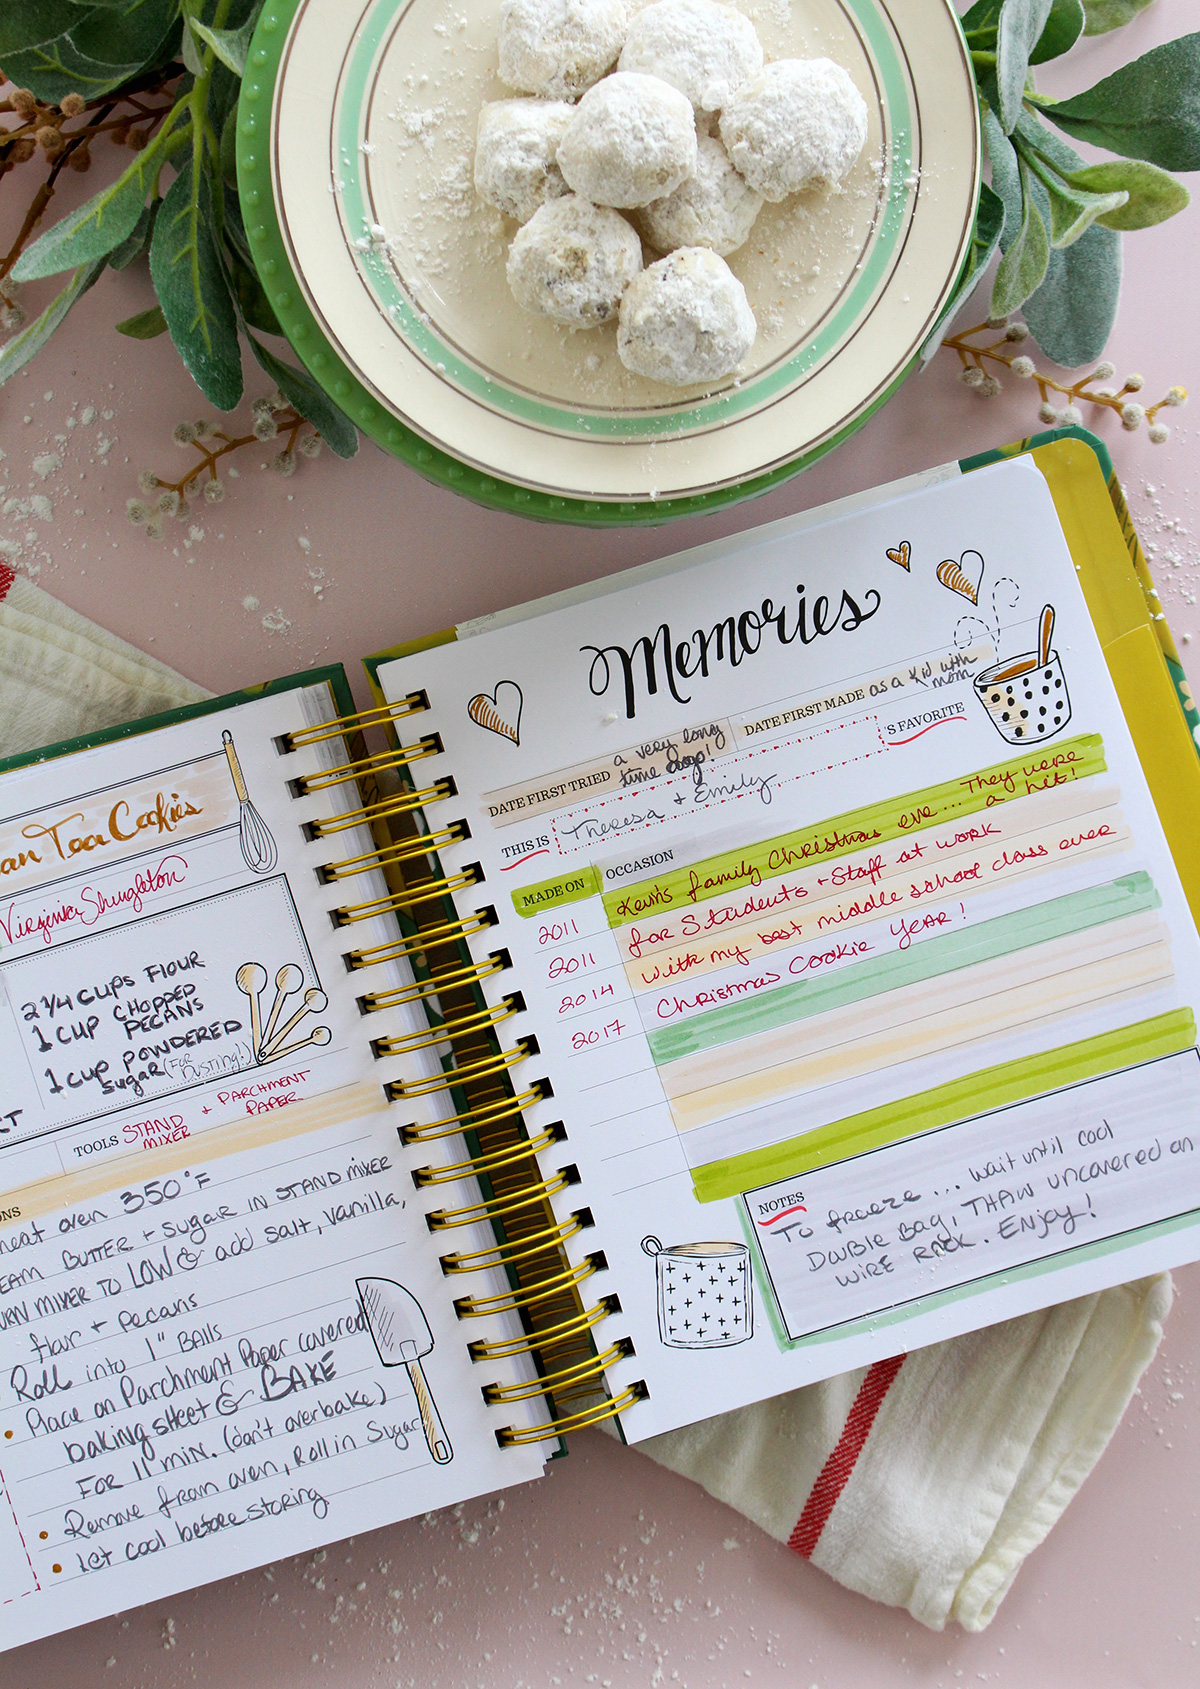 Russian Tea Cookie Recipe In The Keepsake Kitchen Diary - a family cookbook and memory keeper